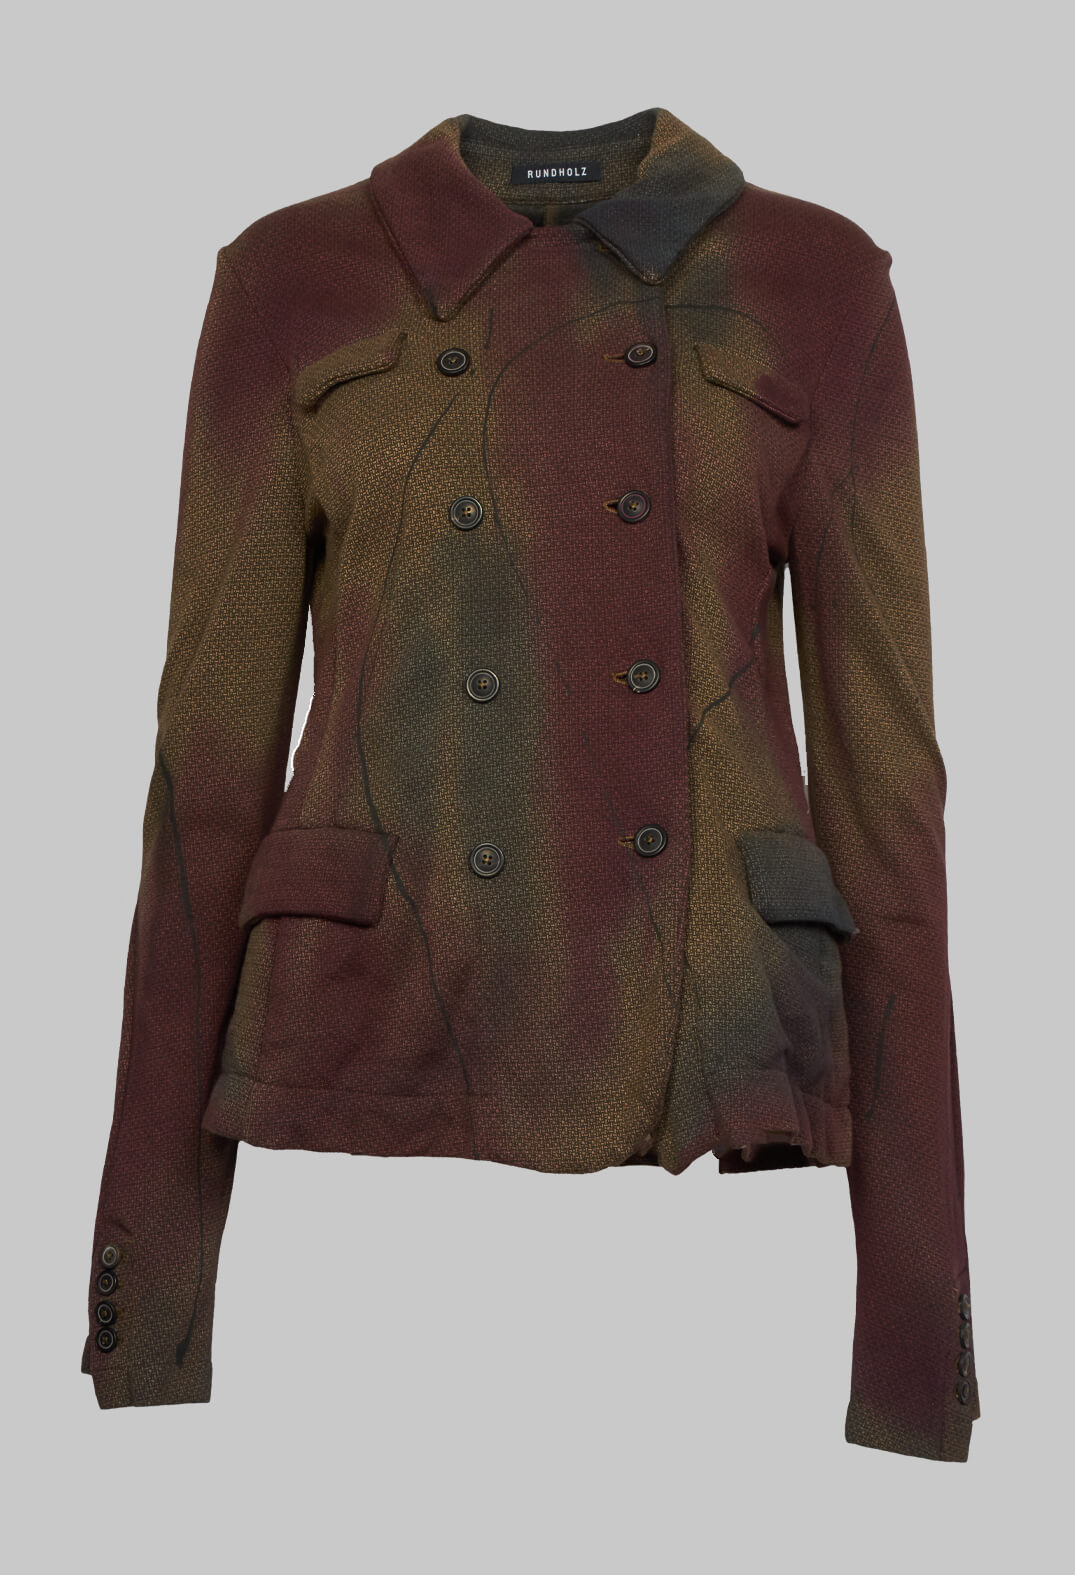 Double Breasted Jacket with Pointed Collar in Umbra Paint